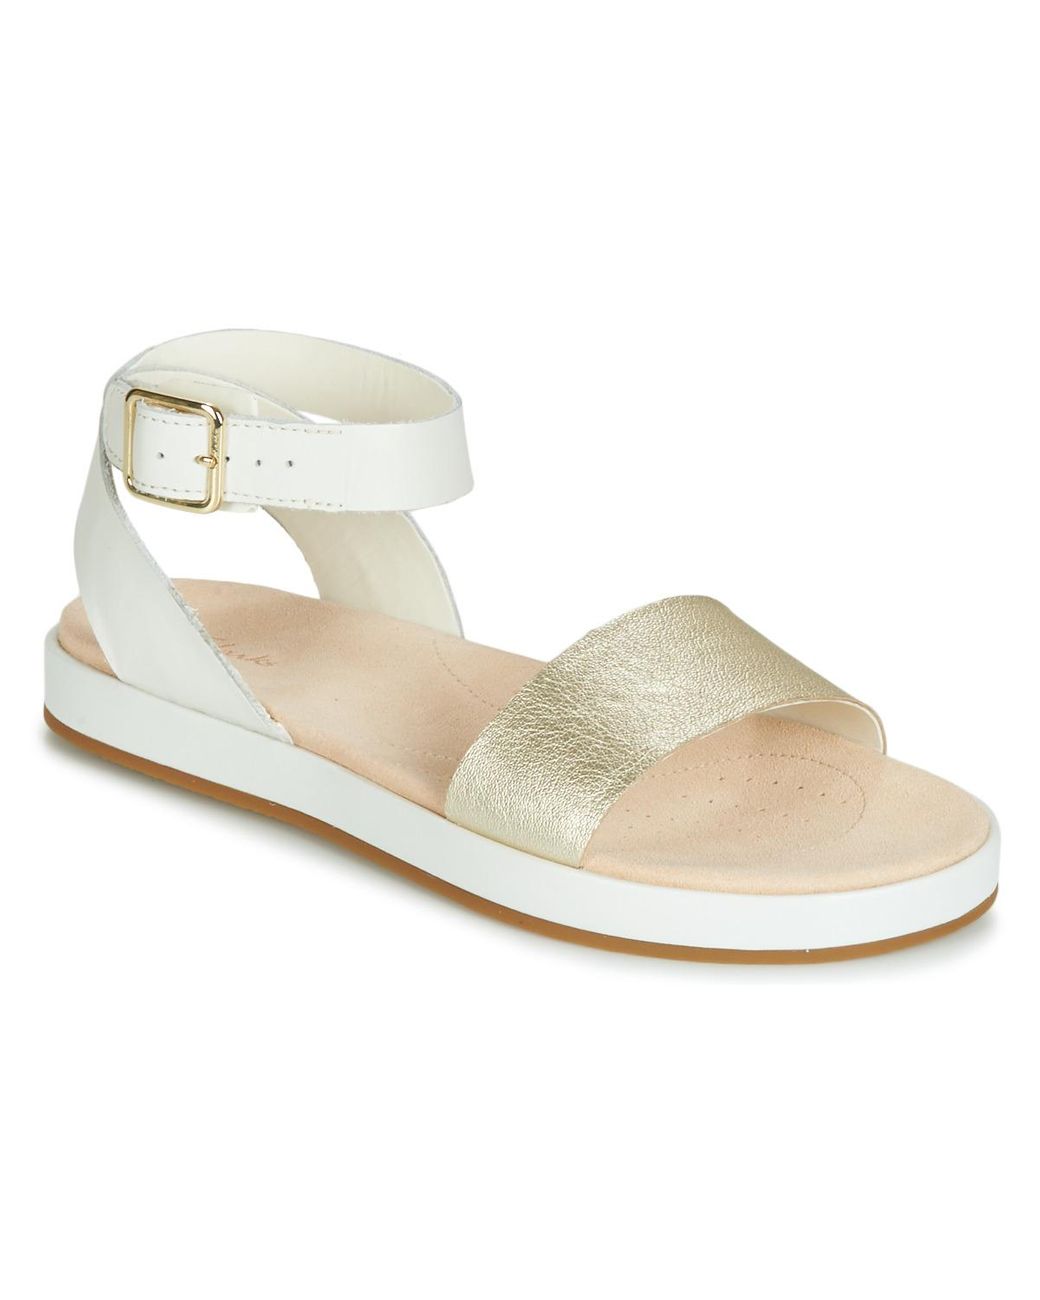 Clarks Leather Botanic Ivy Sandals in White - Save 33% | Lyst UK